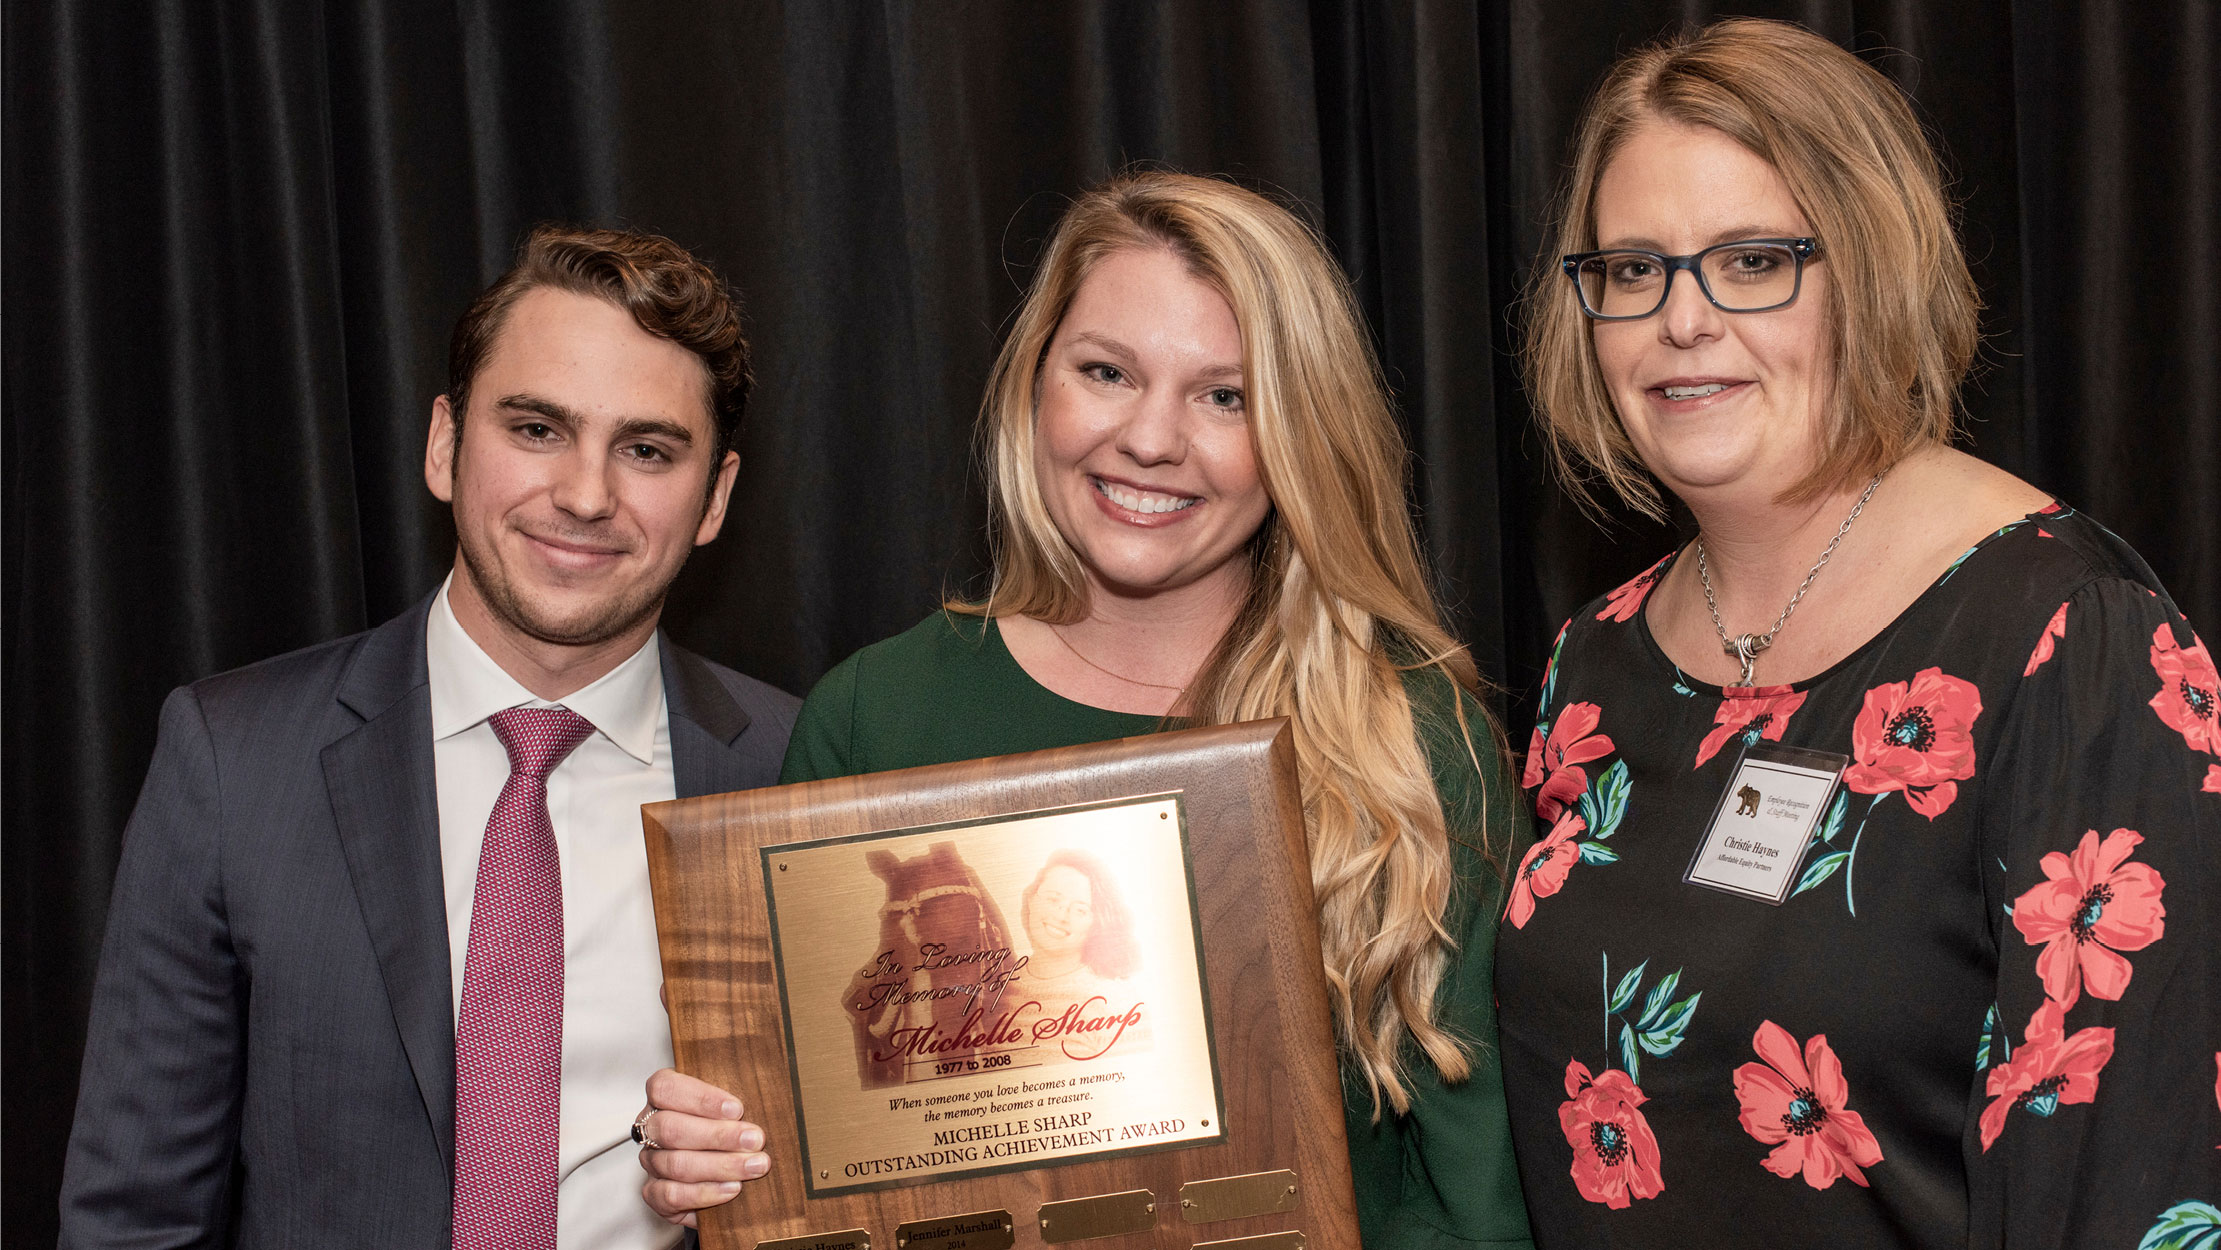 Walker Smith, President of JES Holdings, Blair Jones, the Michelle Sharp Outstanding Achievement Award 2018 recipient, and Christie Haynes, AEP Vice President of Transactions & Asset Management, celebrate at JES Holdings’ employee recognition.